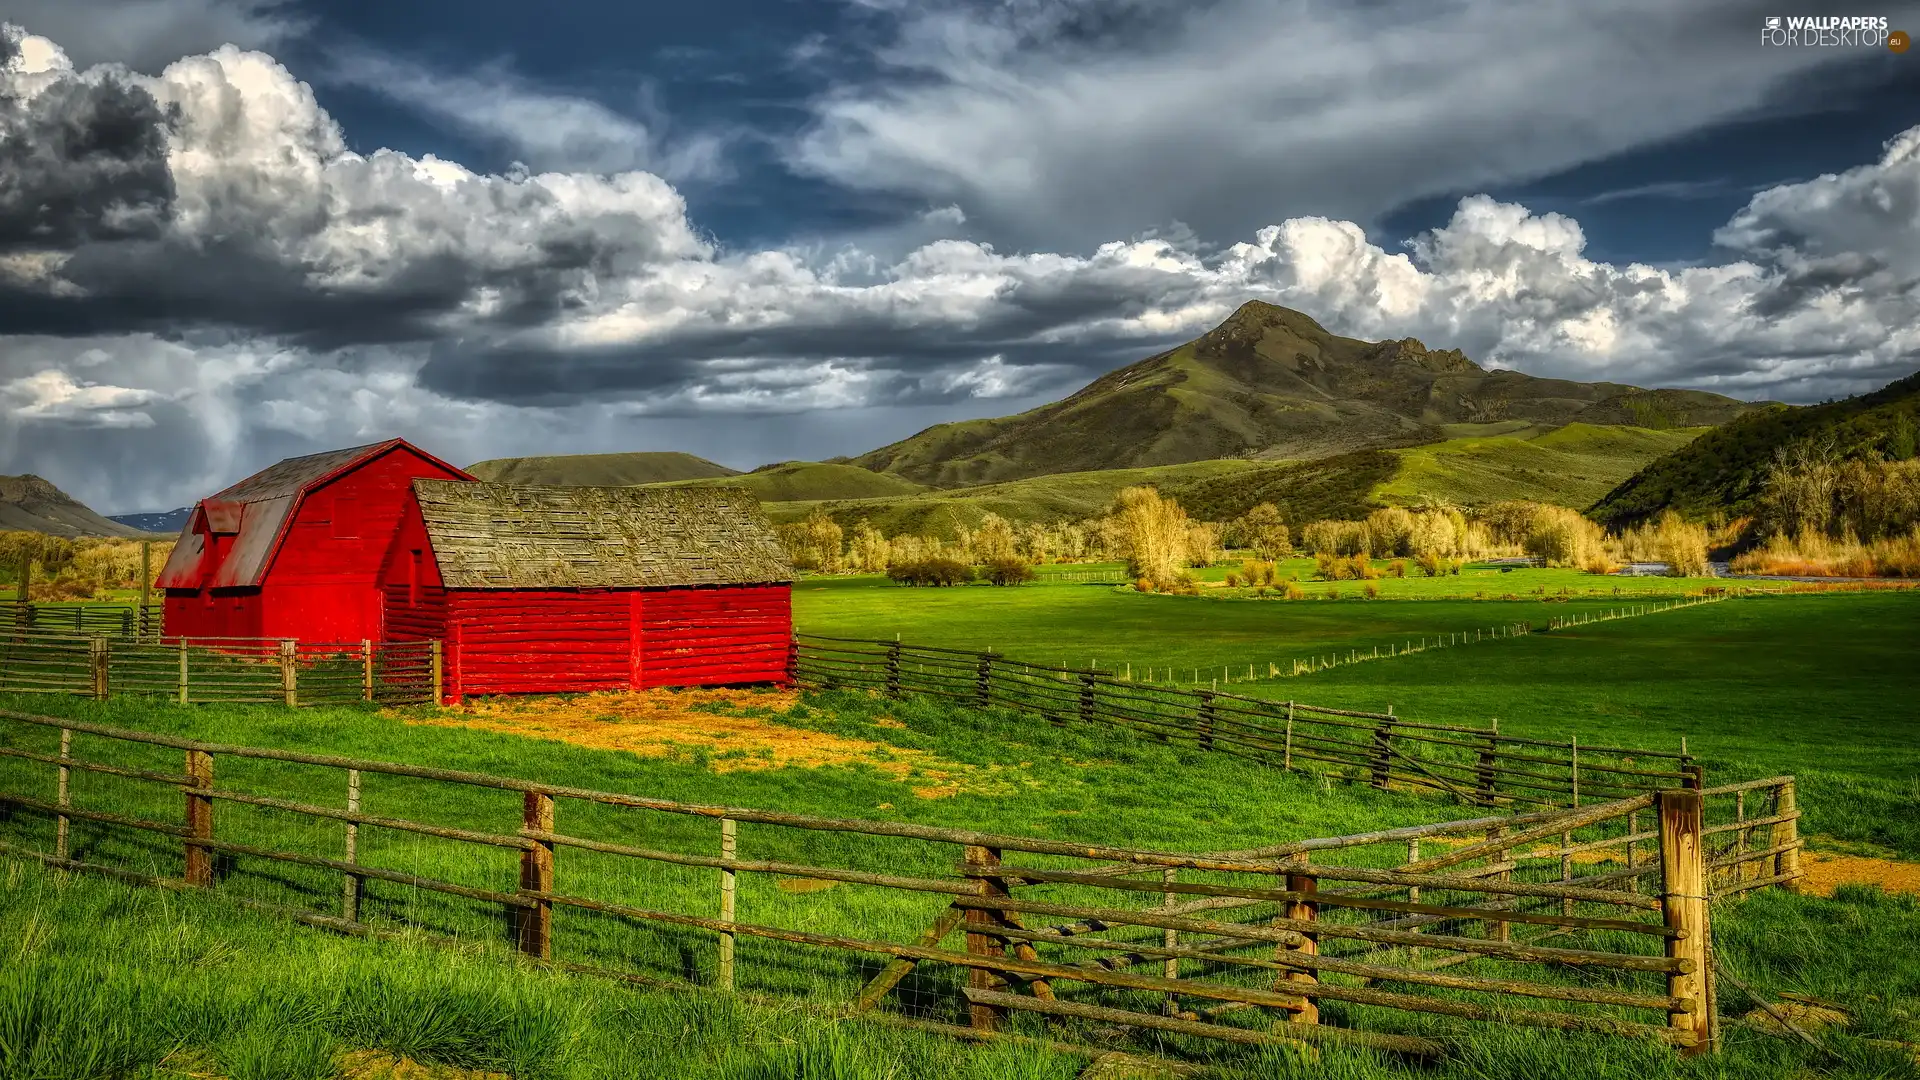 fence, Red, Mountains, clouds, field, Barns